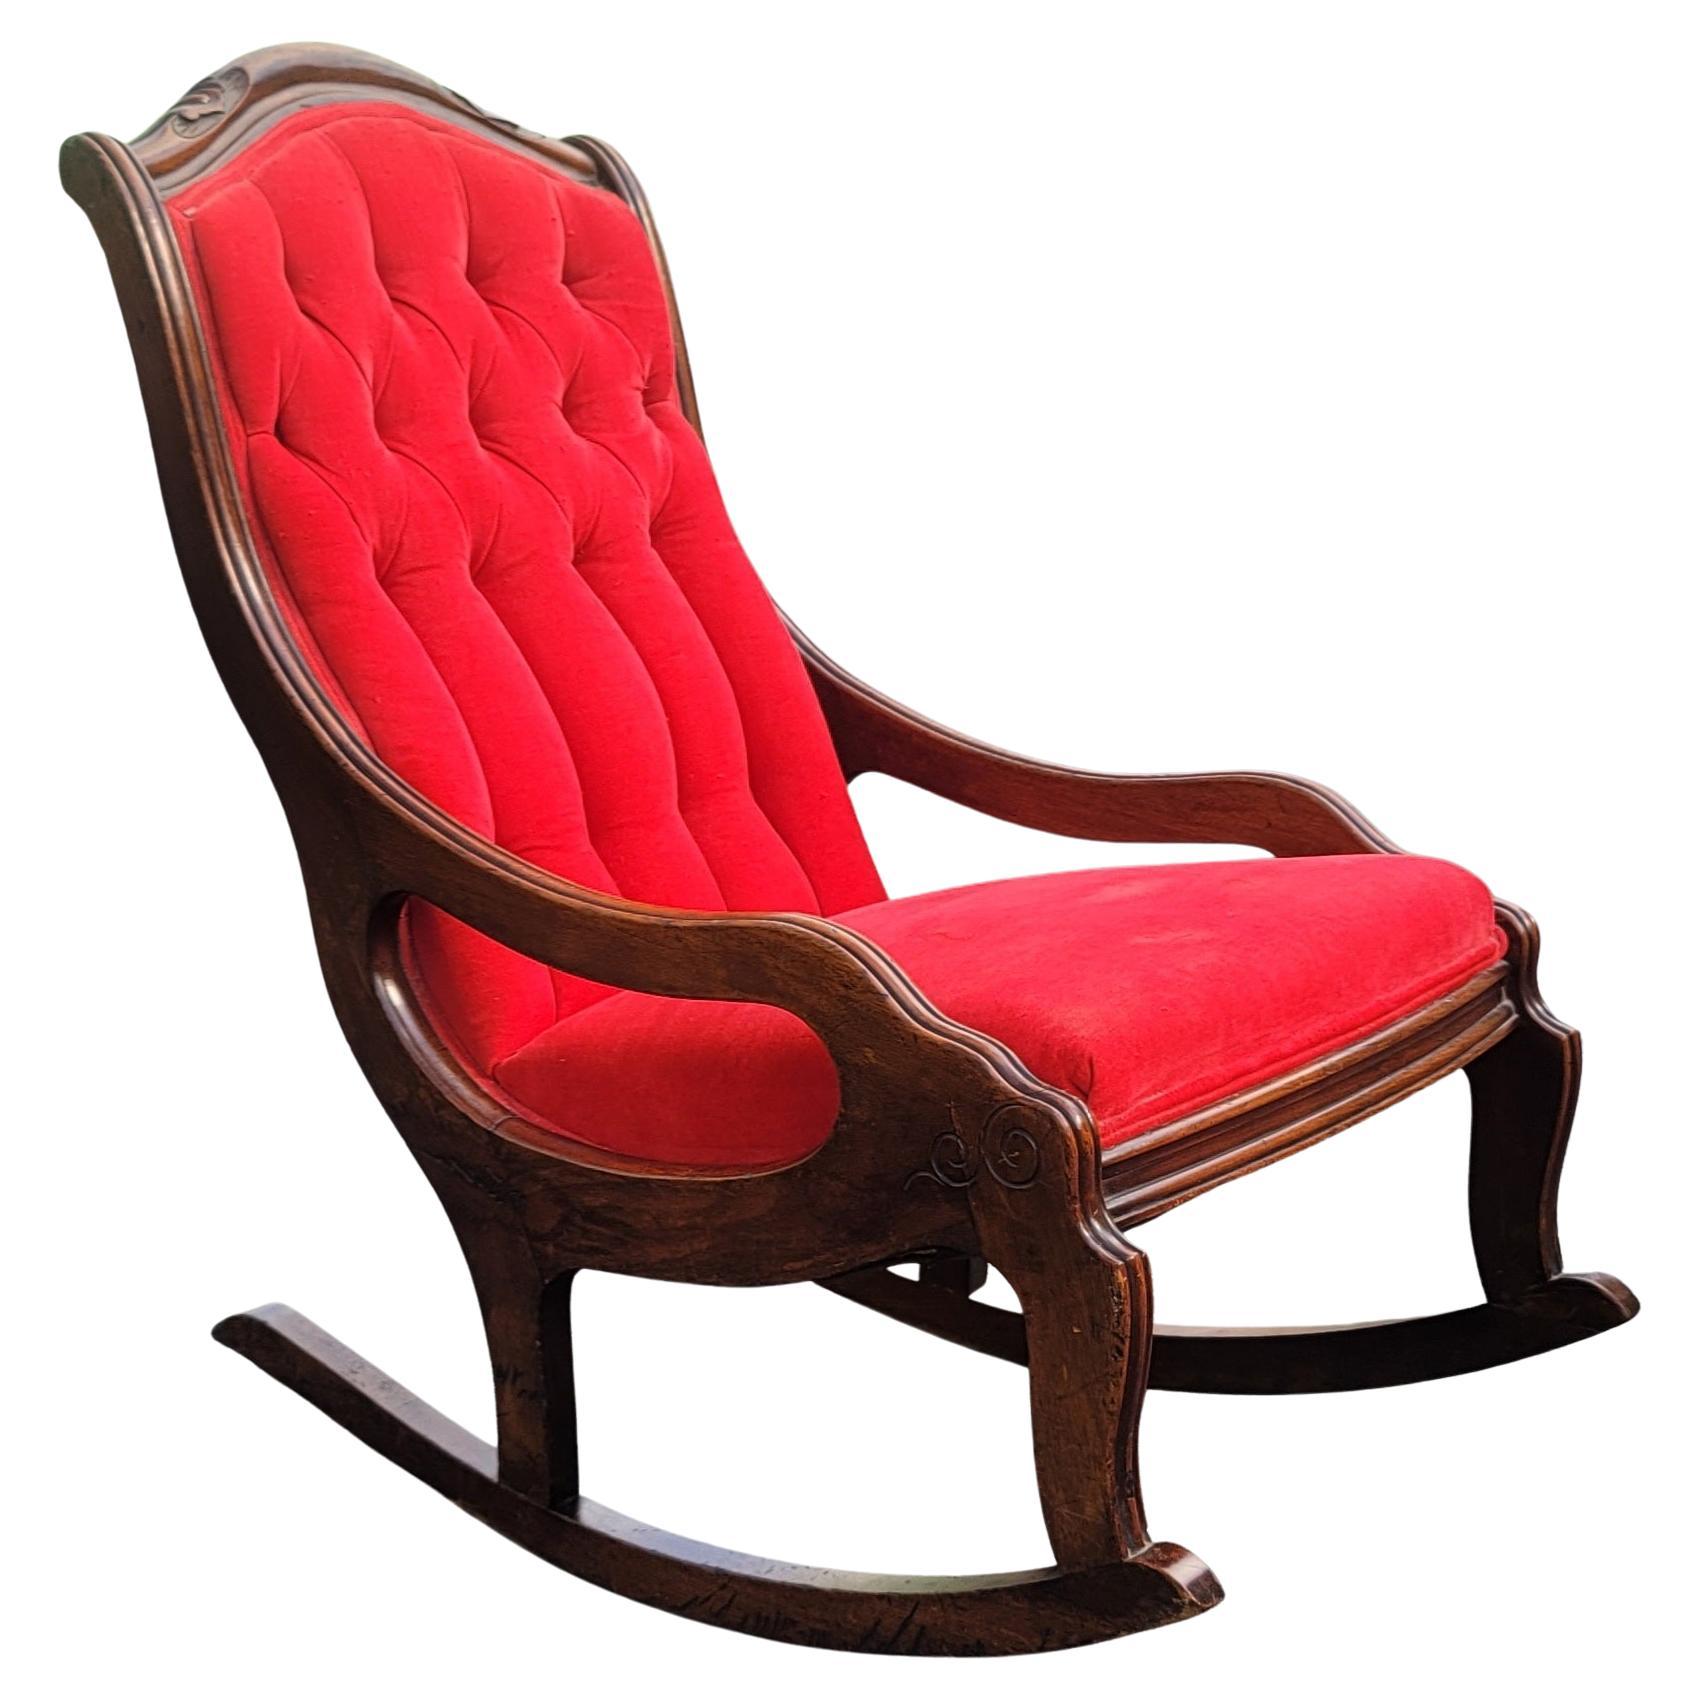 Victorian Mahogany and Tufted Velvet Upholstered Rocking Chair, Circa 1920s  For Sale at 1stDibs | victorian upholstered rocking chair, vintage  upholstered rocking chair, antique upholstered rocking chair